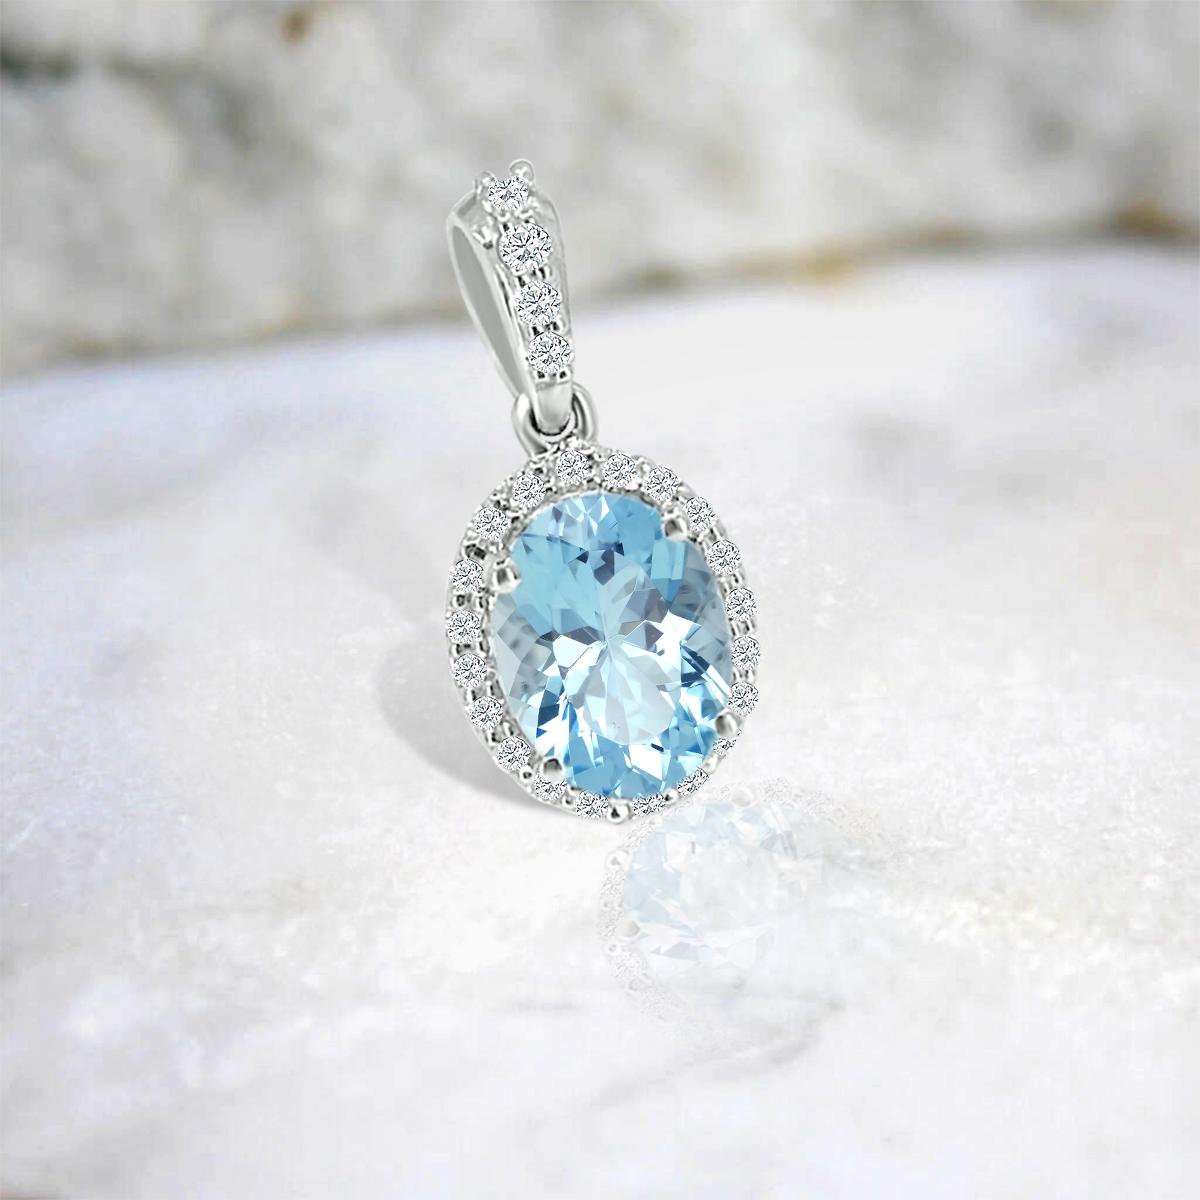 This Gorgeous Gemstone And Diamond Pendant Features A 8x6mm Oval Shaped Aquamarine Stone That Is Surrounded By Brilliant Cut Round Diamonds In Halo Fashion.
This Pendant Is Settled In 14k White Gold. You Will Love Wearing This Beautiful Aquamarine